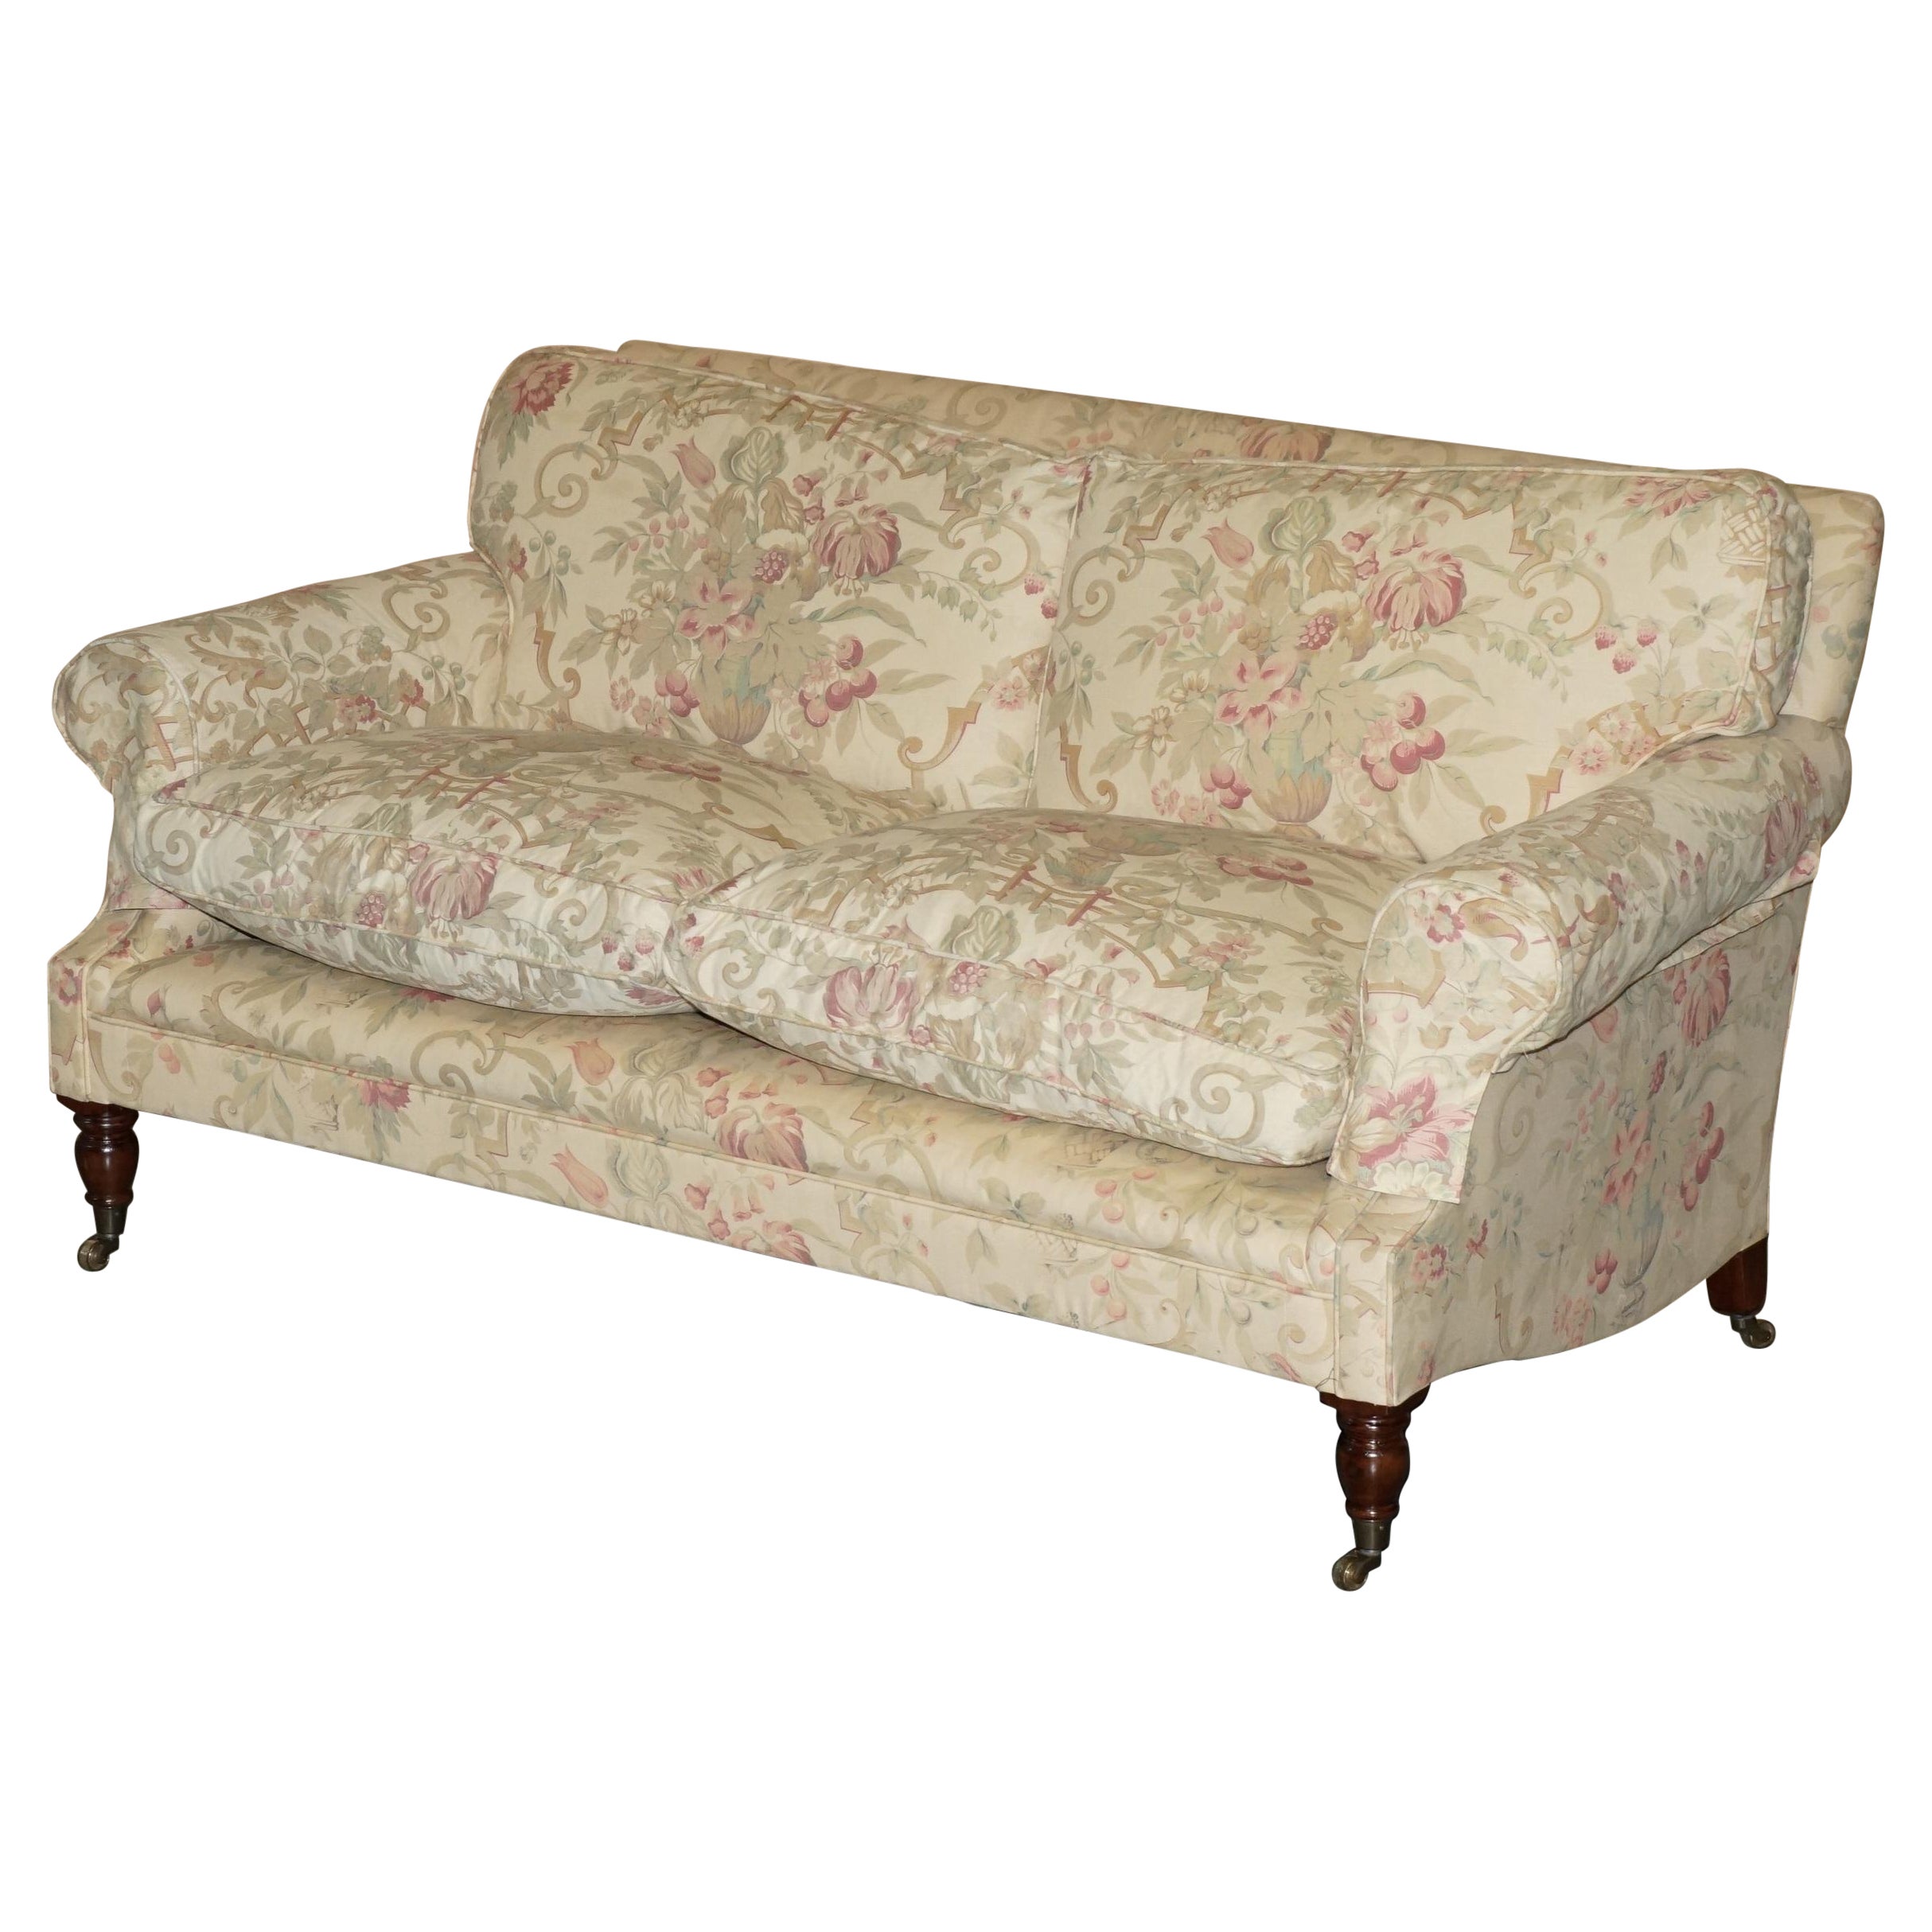 GEORGE SMITH CHELSEA TWO SEAT SOFA IN ORIGINAL UPHOLSTERY PART SUiTE For Sale